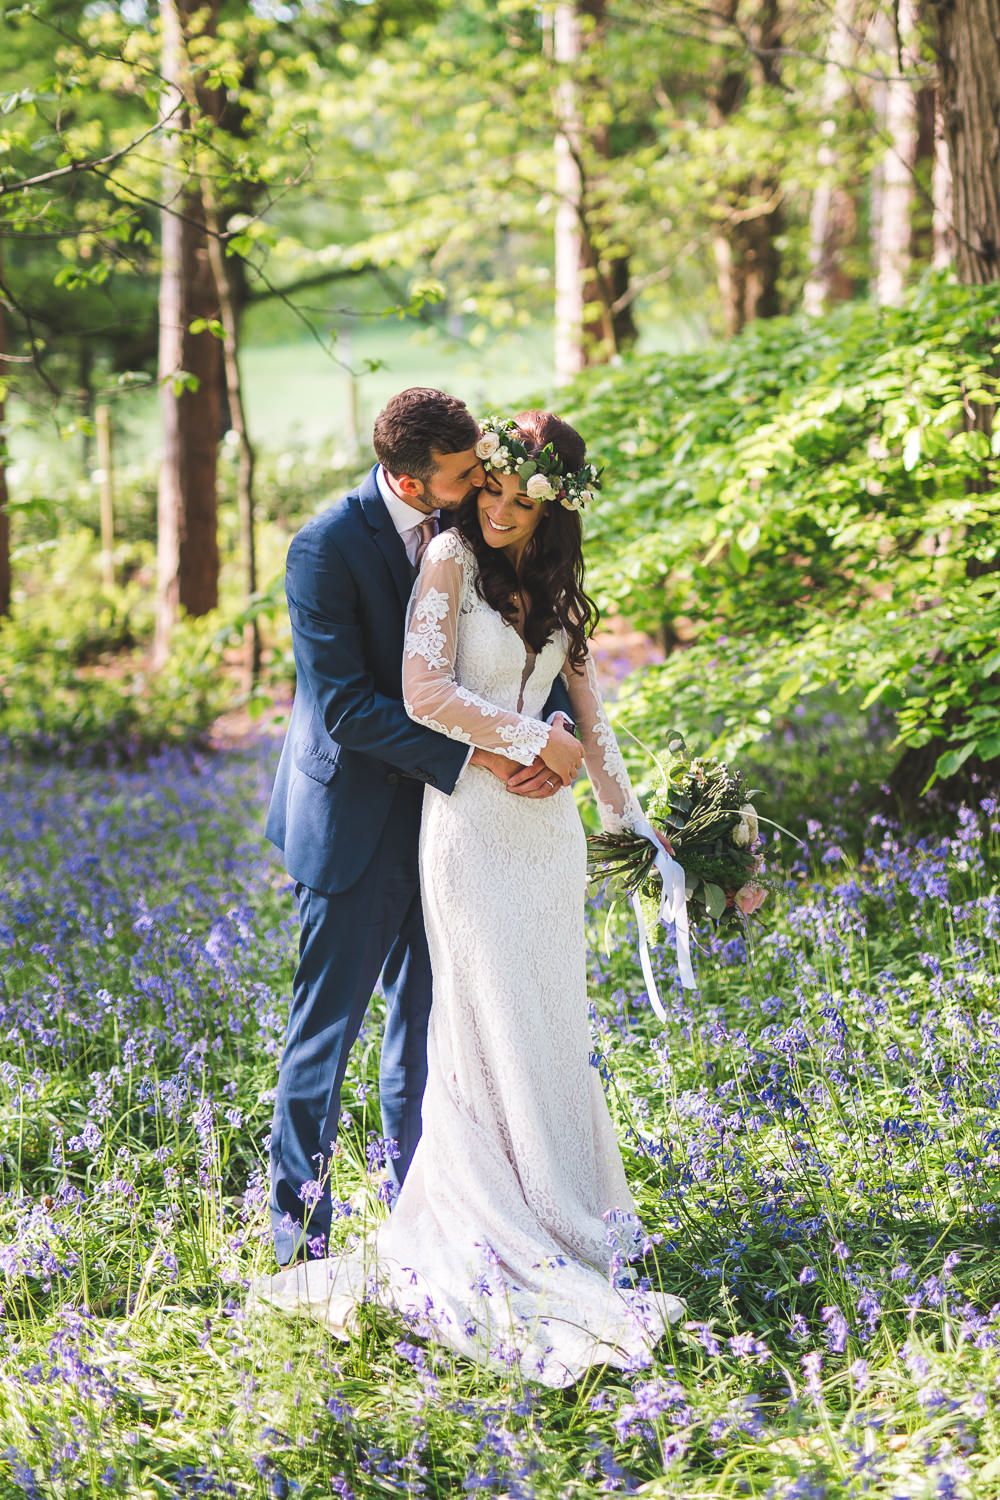 Spring, Boho, Festival Themed Wedding with Flower Crowns, Pastel ...